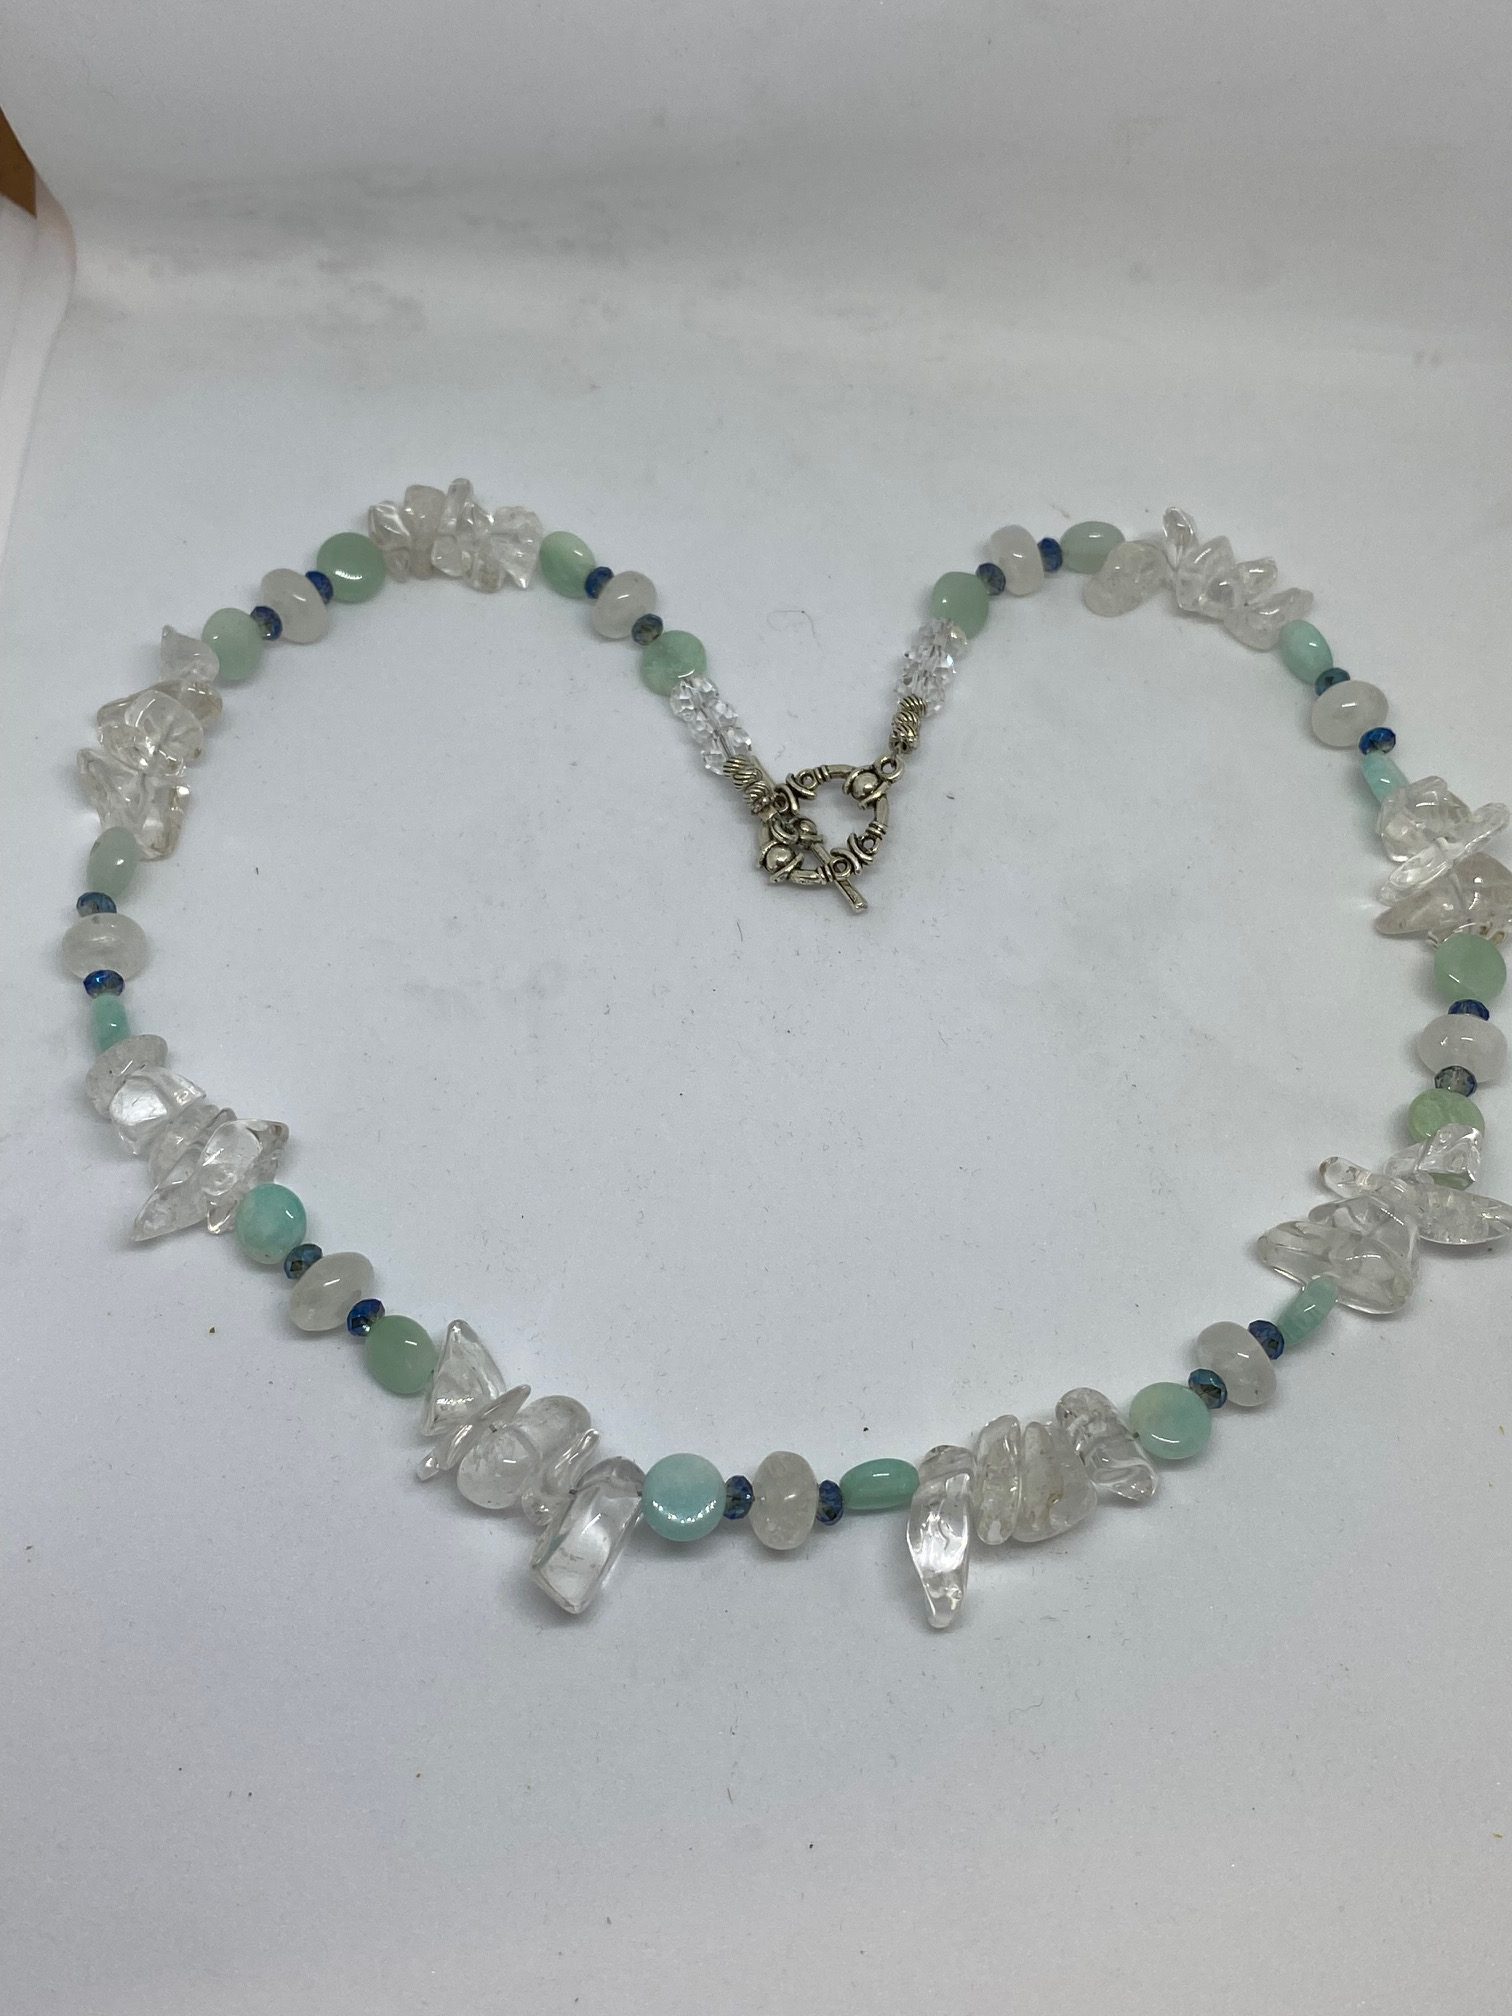 Clear Quartz, Amazonite, Moonstone, and Swarovski Crystal Necklace This necklace brings emotional support on all levels as well as joy.